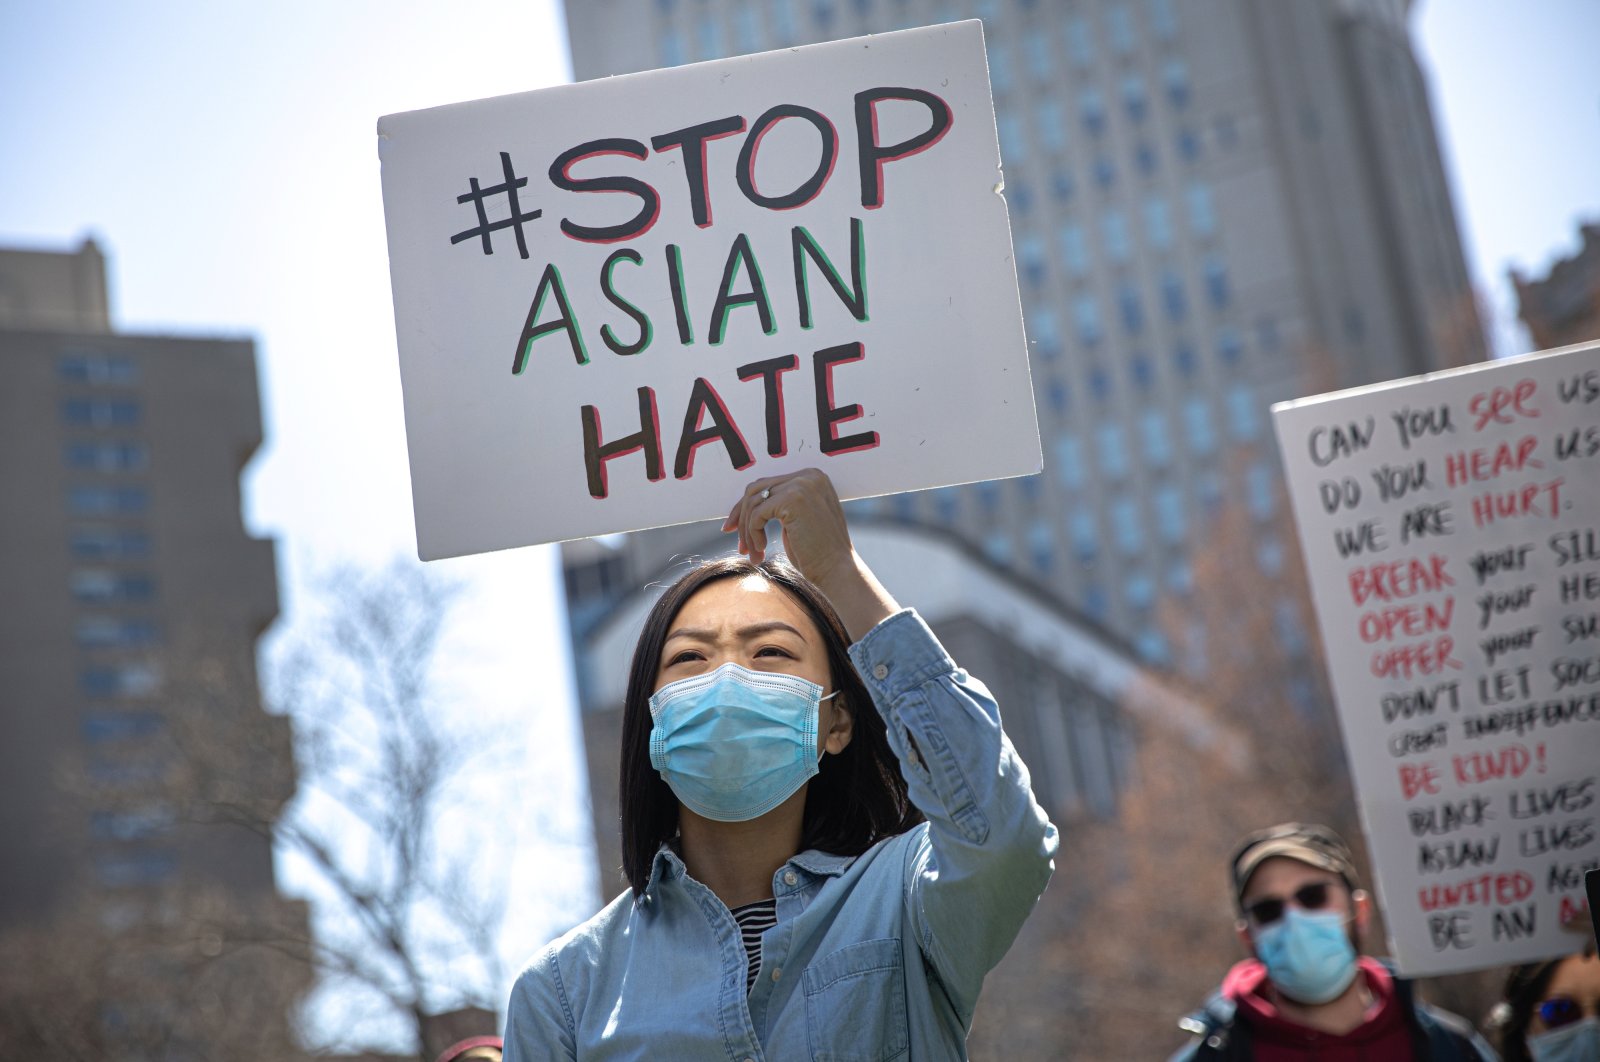 A woman holds a placard as she participates in a “Stop Asian Hate” rally at Columbus Park in New York City, U.S., April 3, 2021. (Reuters)